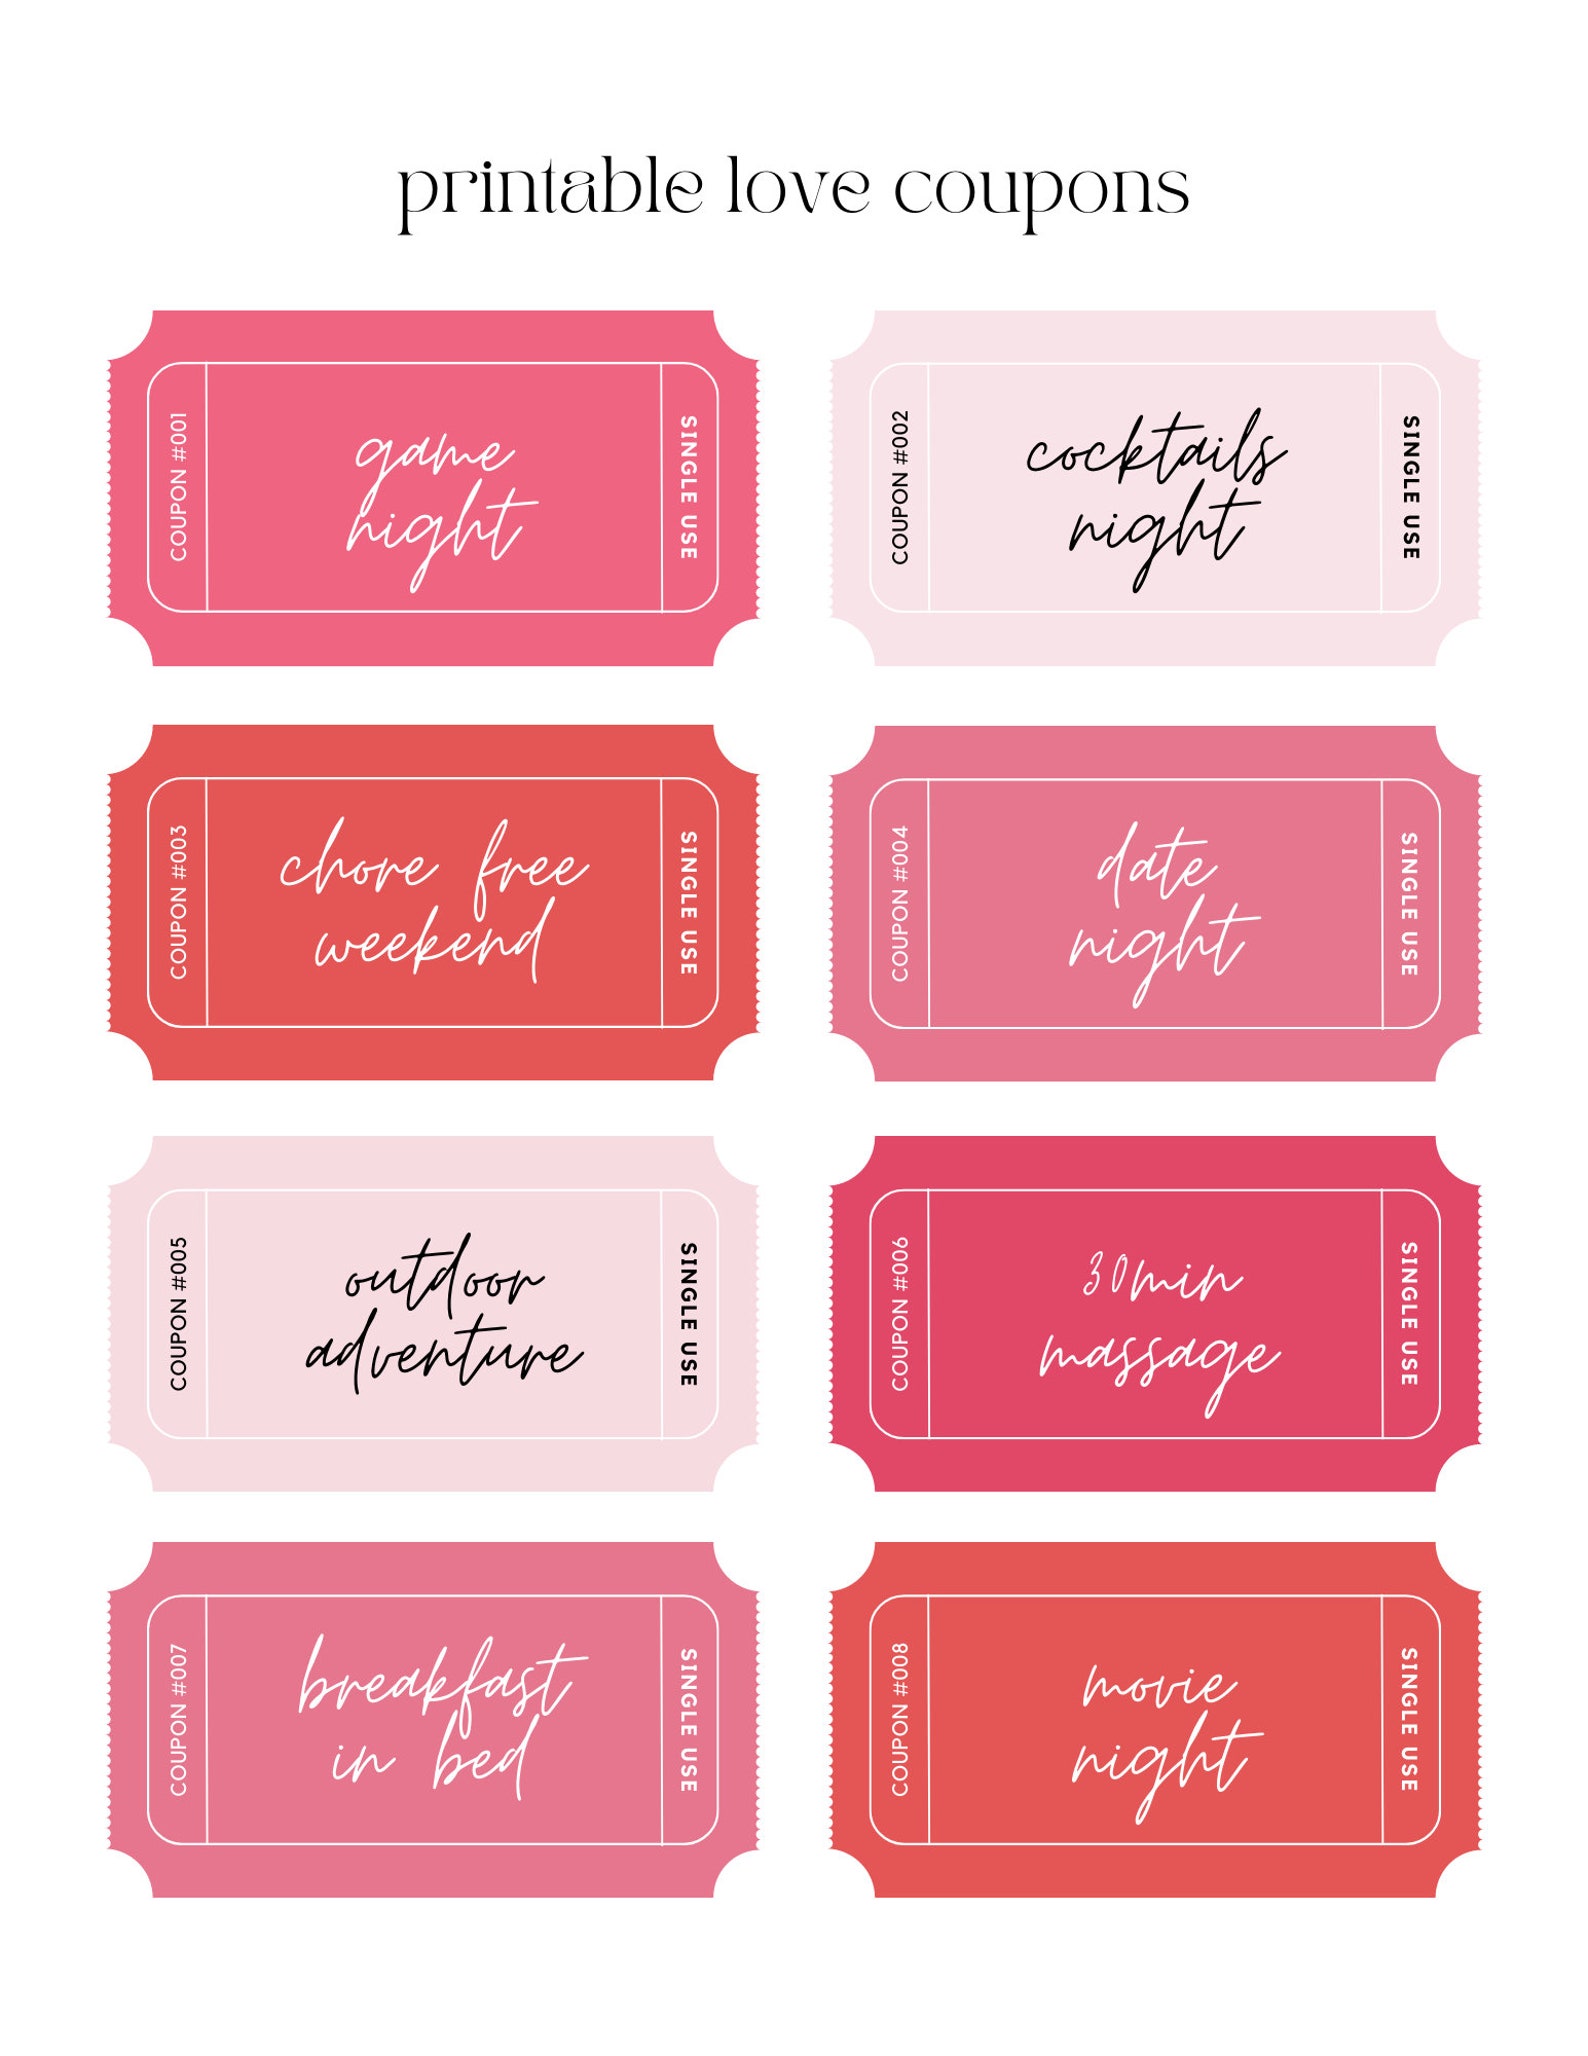 Printable Download, Love Coupons, Date Night, Printable Love Coupons ...